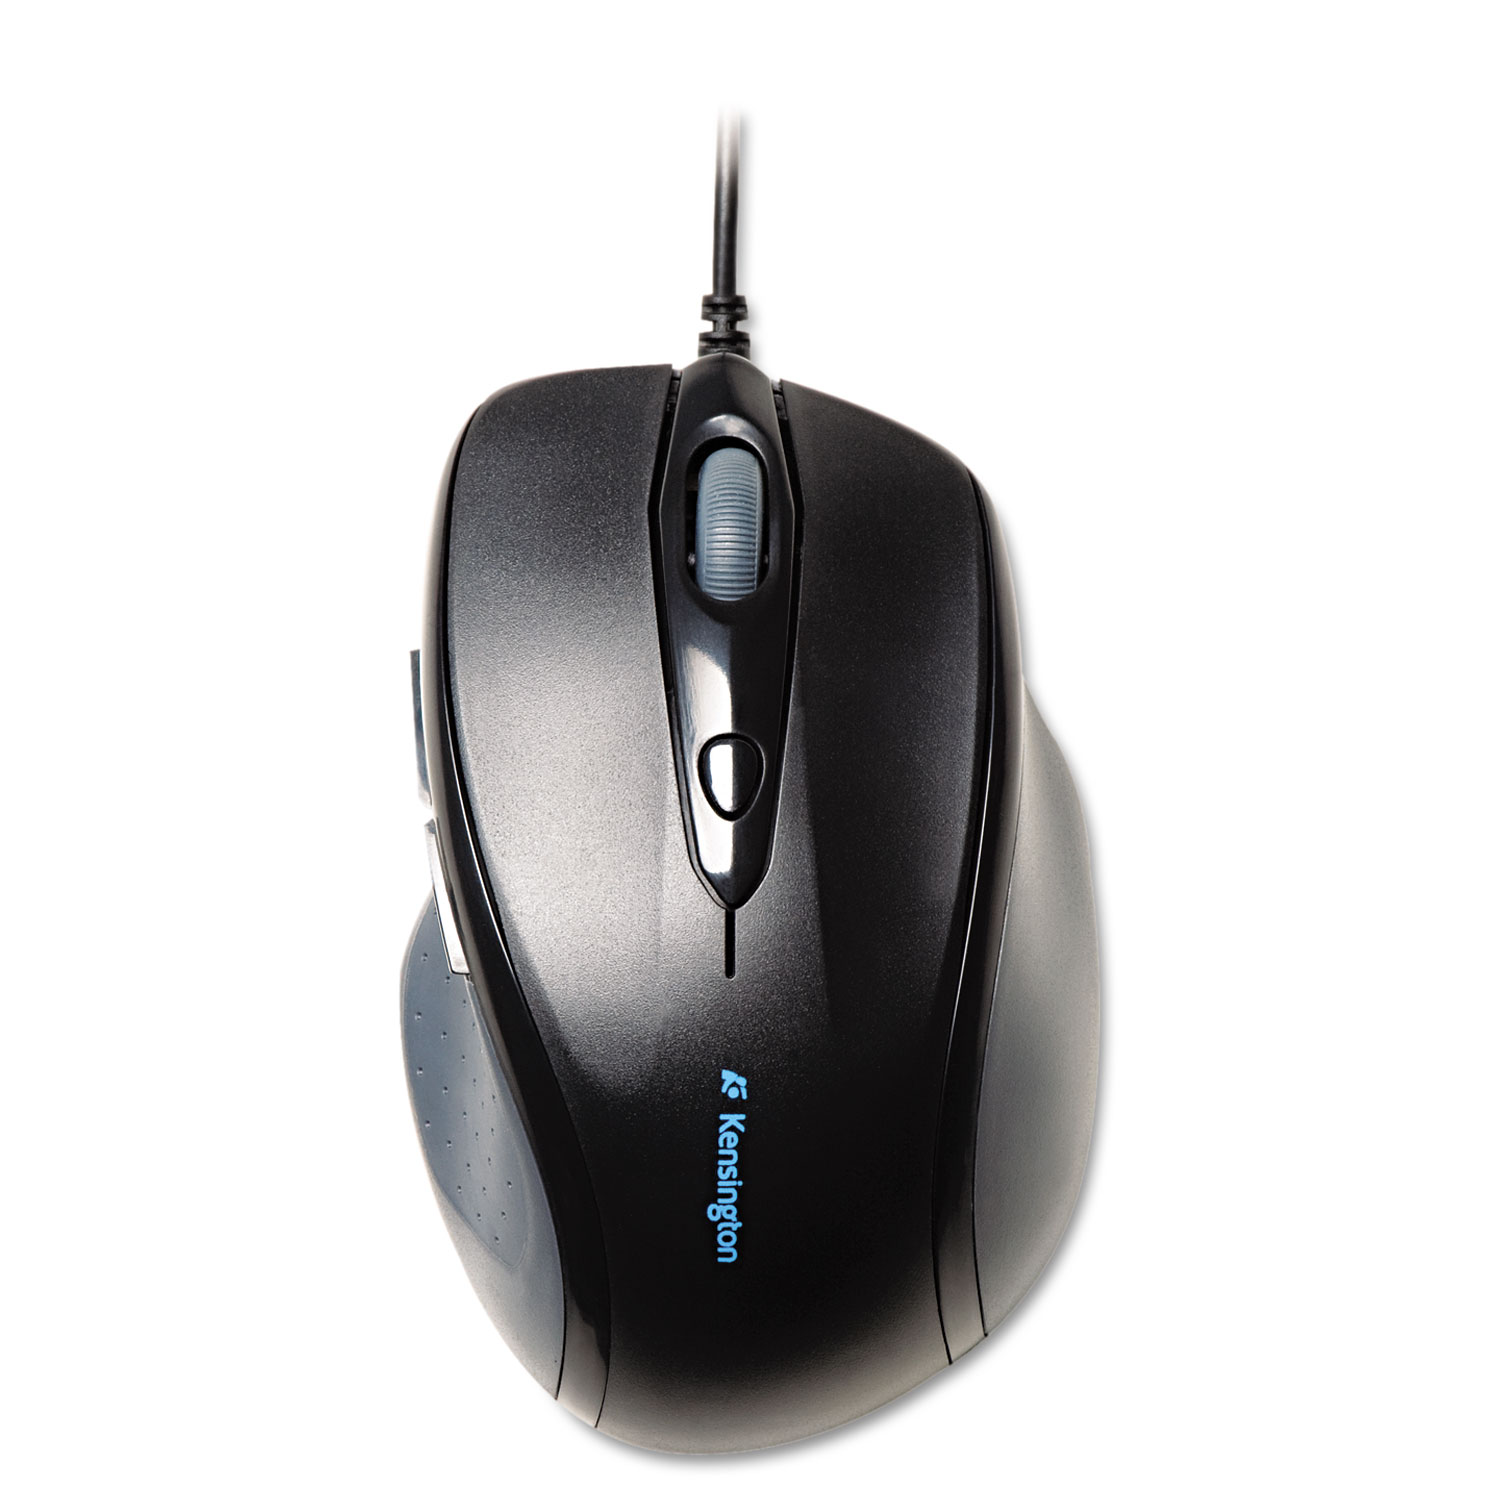  Kensington K72369US Pro Fit Wired Full-Size Mouse, USB 2.0, Right Hand Use, Black (KMW72369) 